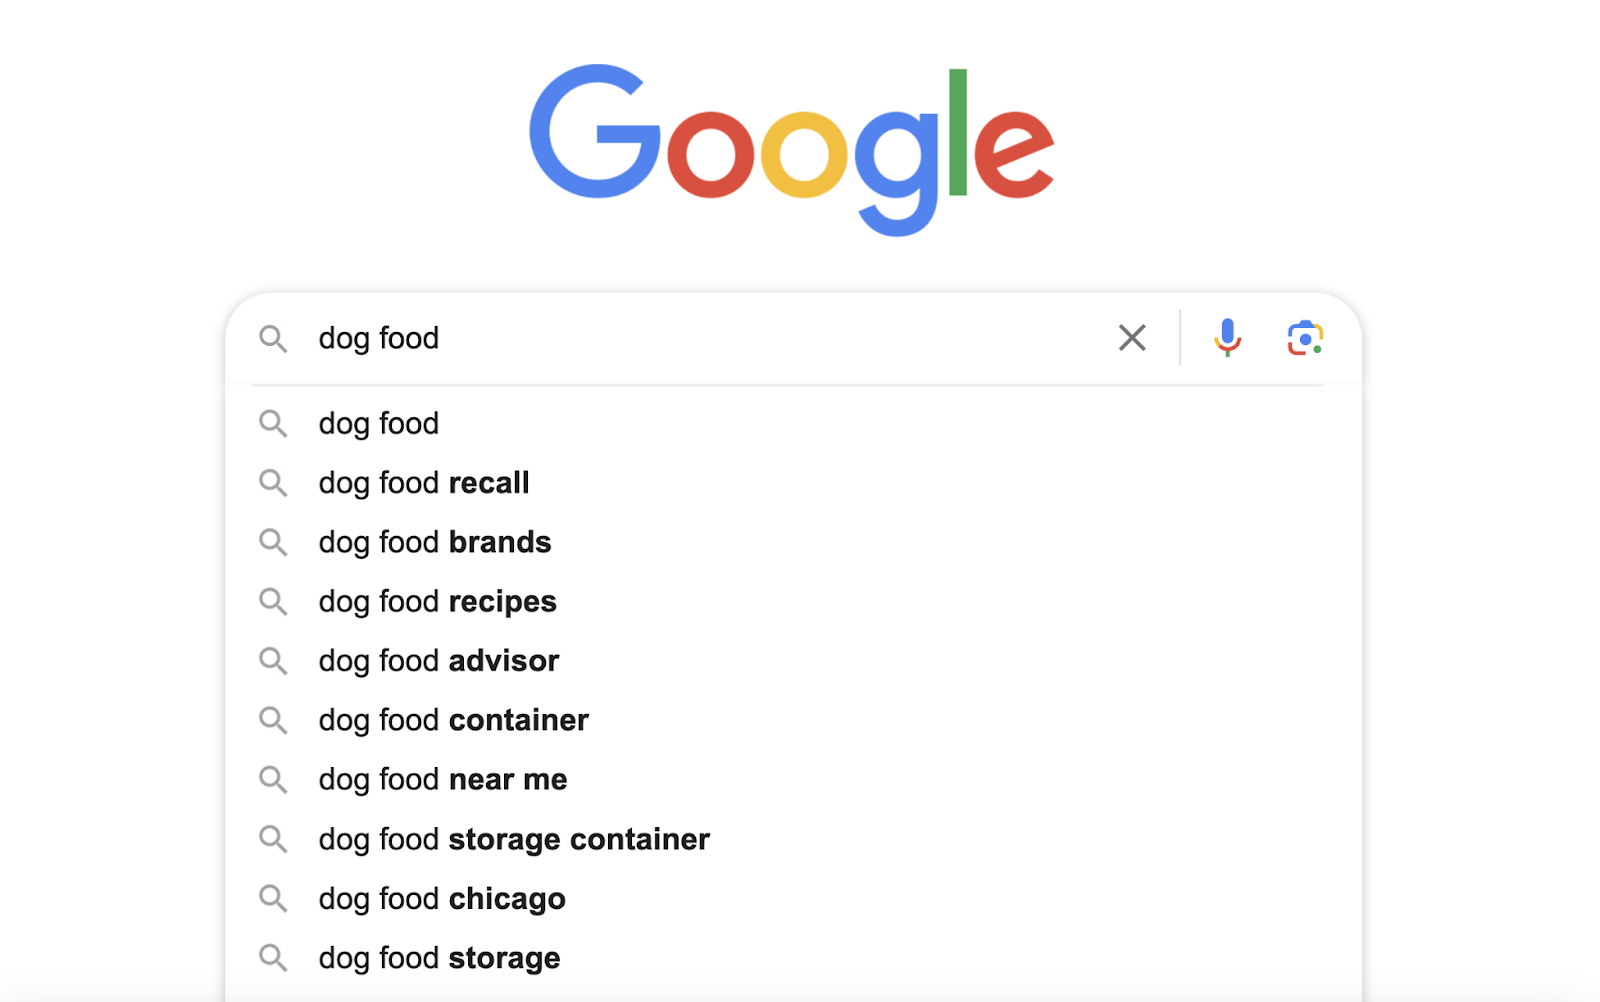 Google's autocomplete suggestions when typing " food" in the search bar